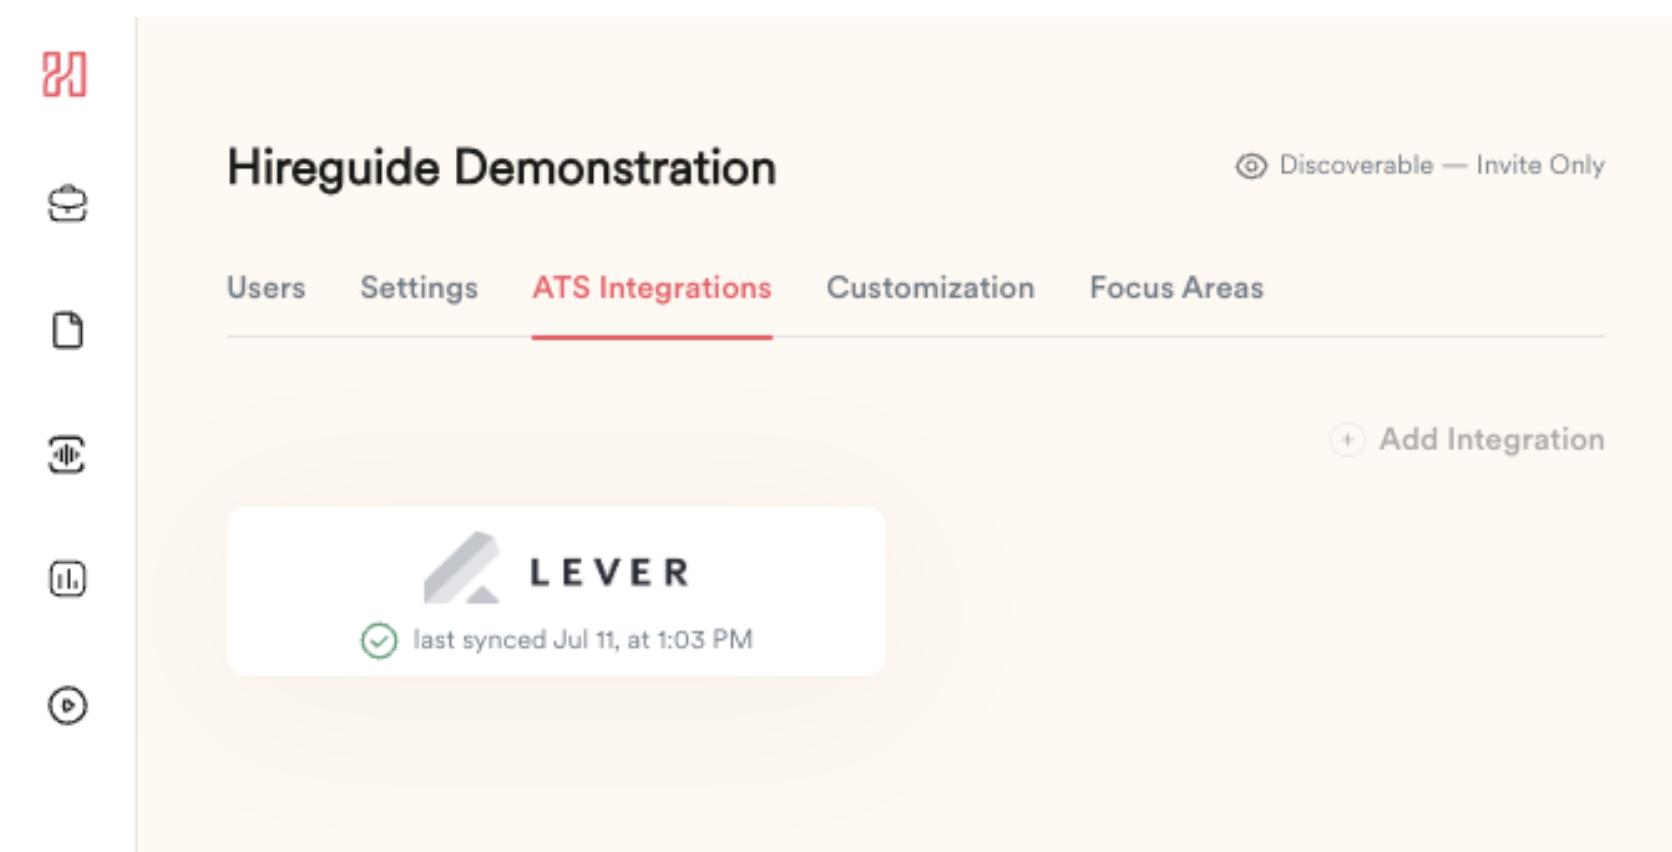 Lever listing on ATS Integrations page in Hireguide